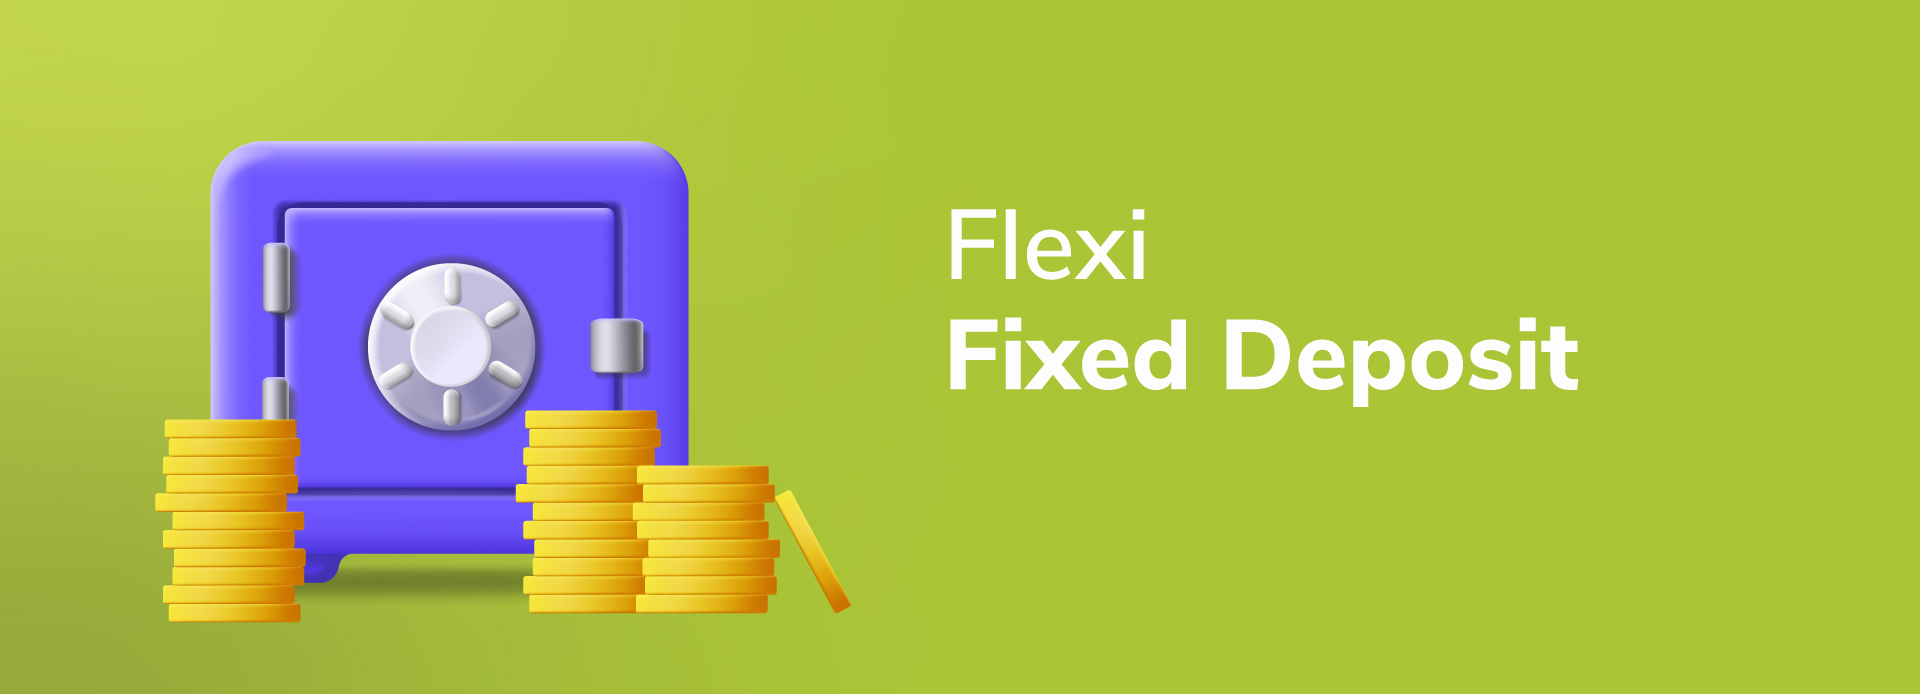 Flexi fixed deposit: Key features, benefits, and differences from regular FDs